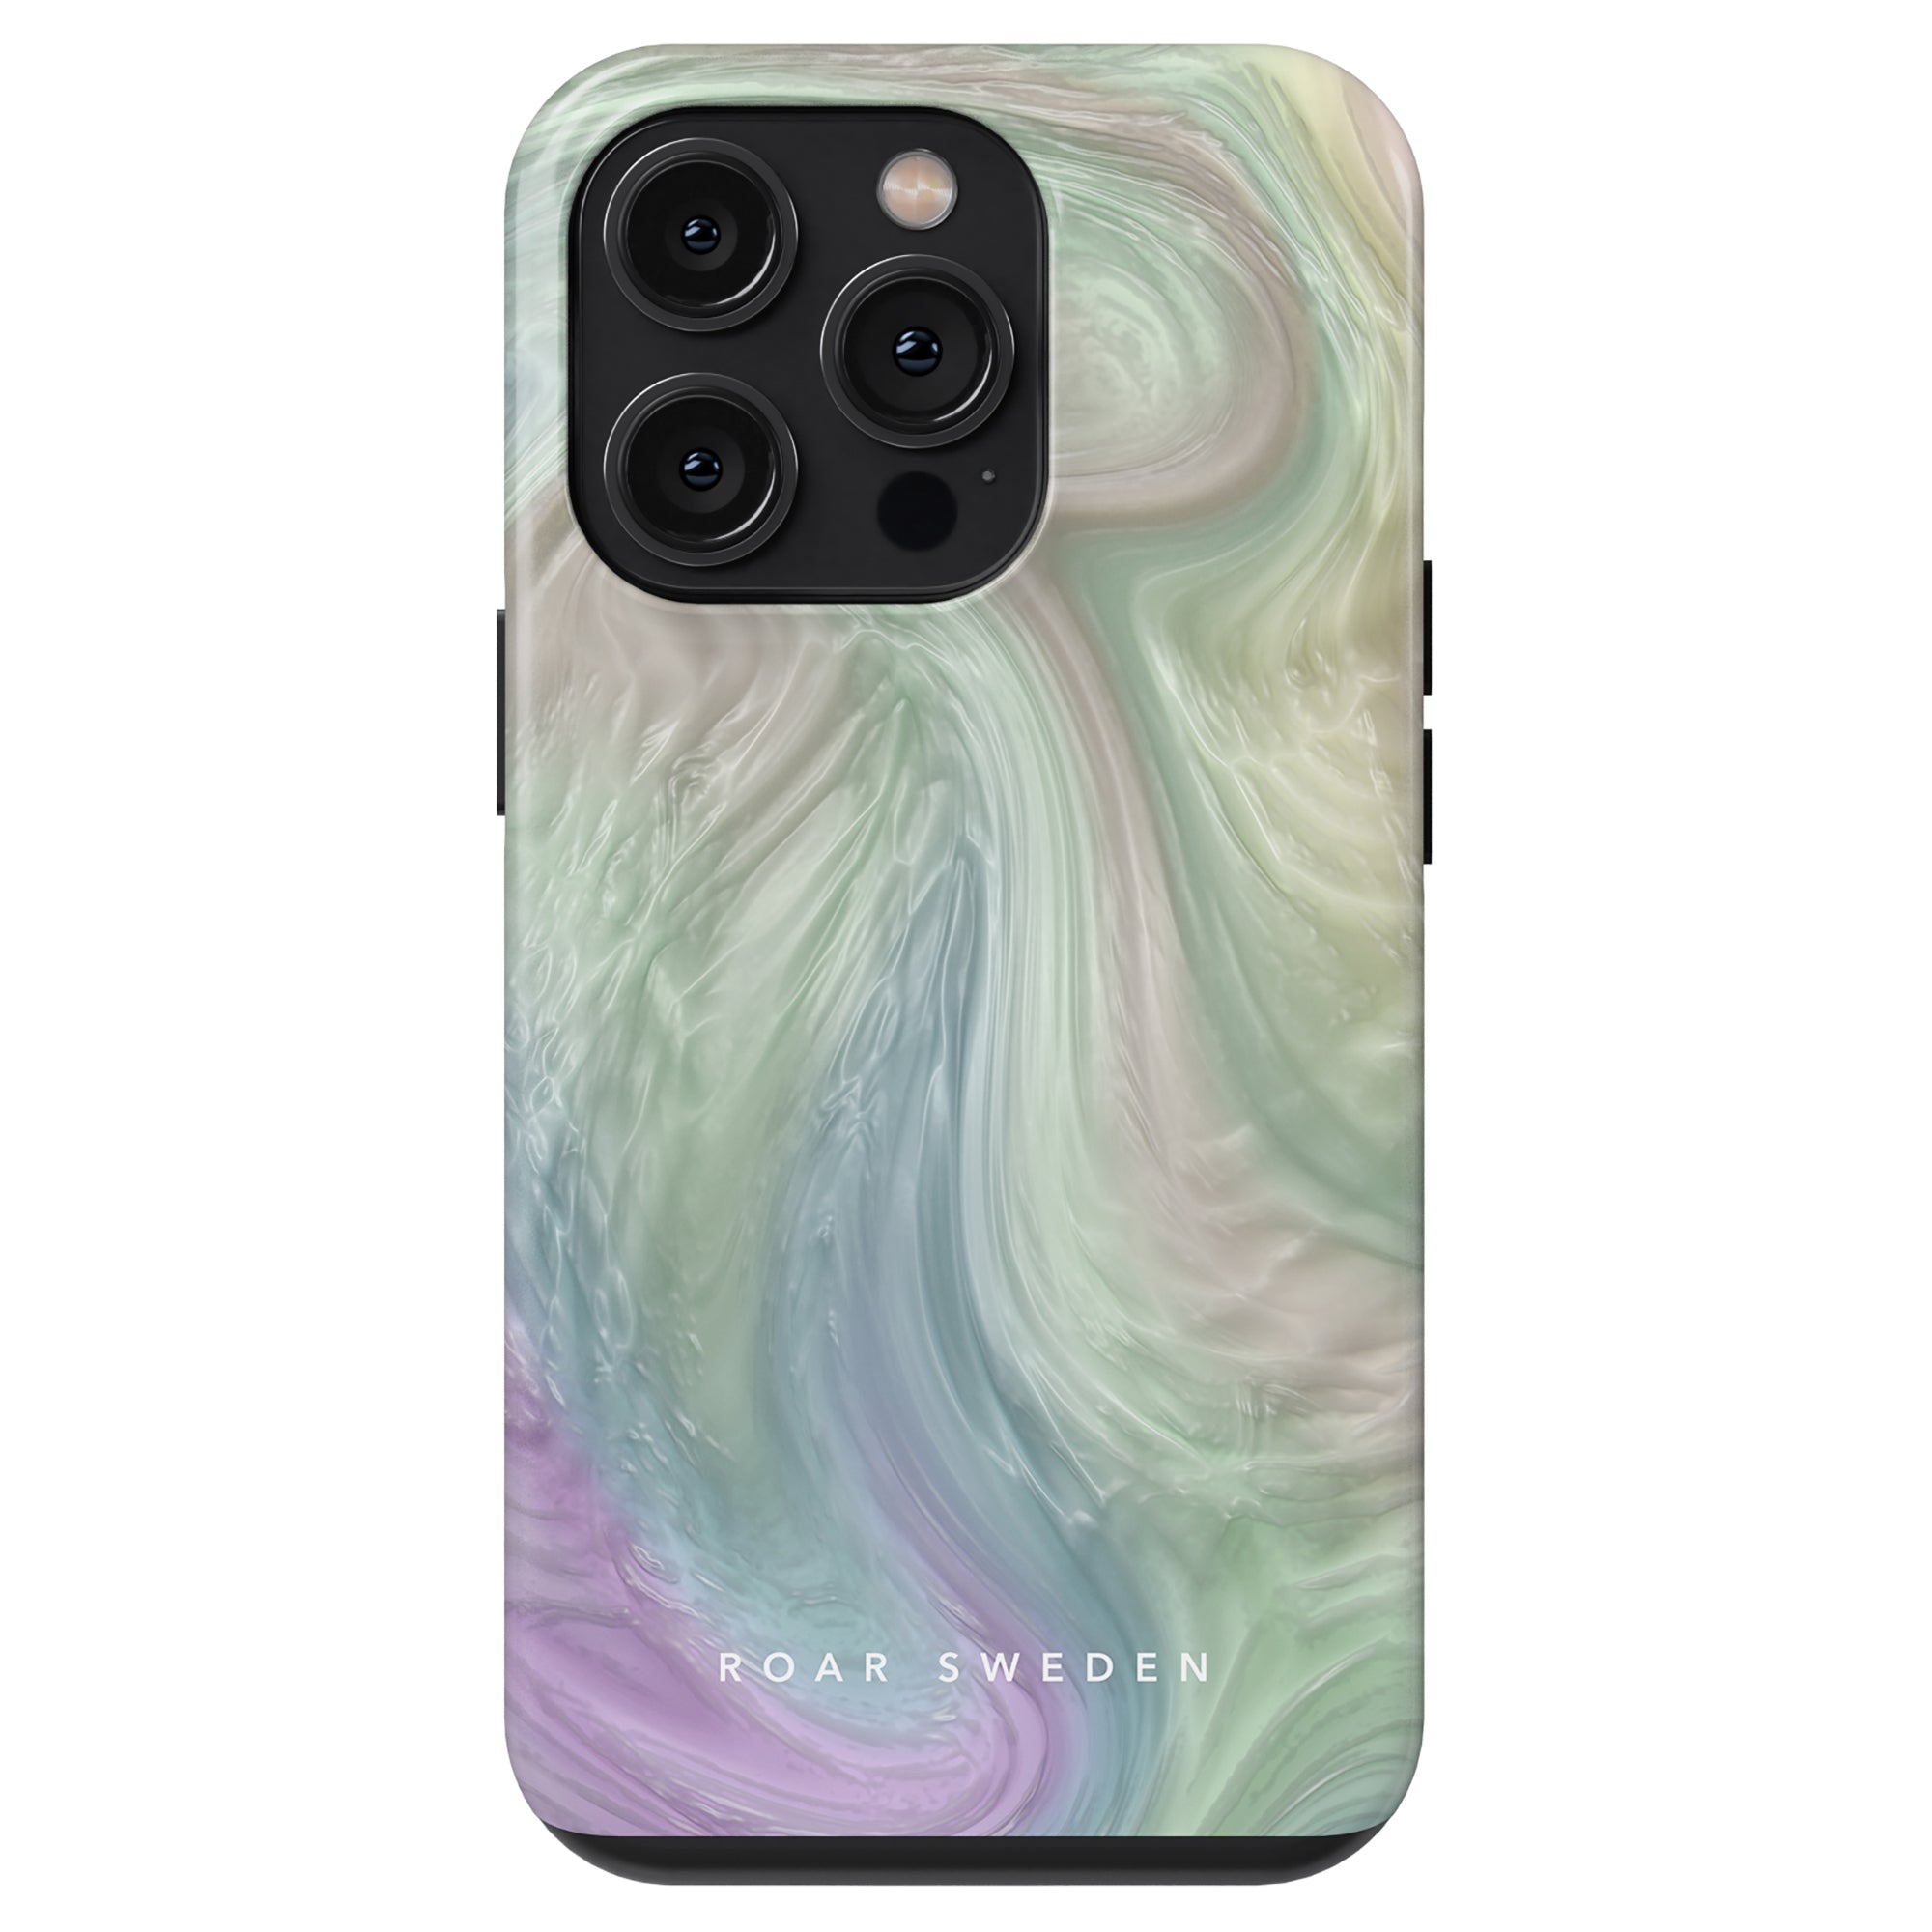 Nacre - Tough Case with a swirling pastel design and triple-lens camera cutouts from the Oyster Collection, branded "roar sweden" at the bottom.